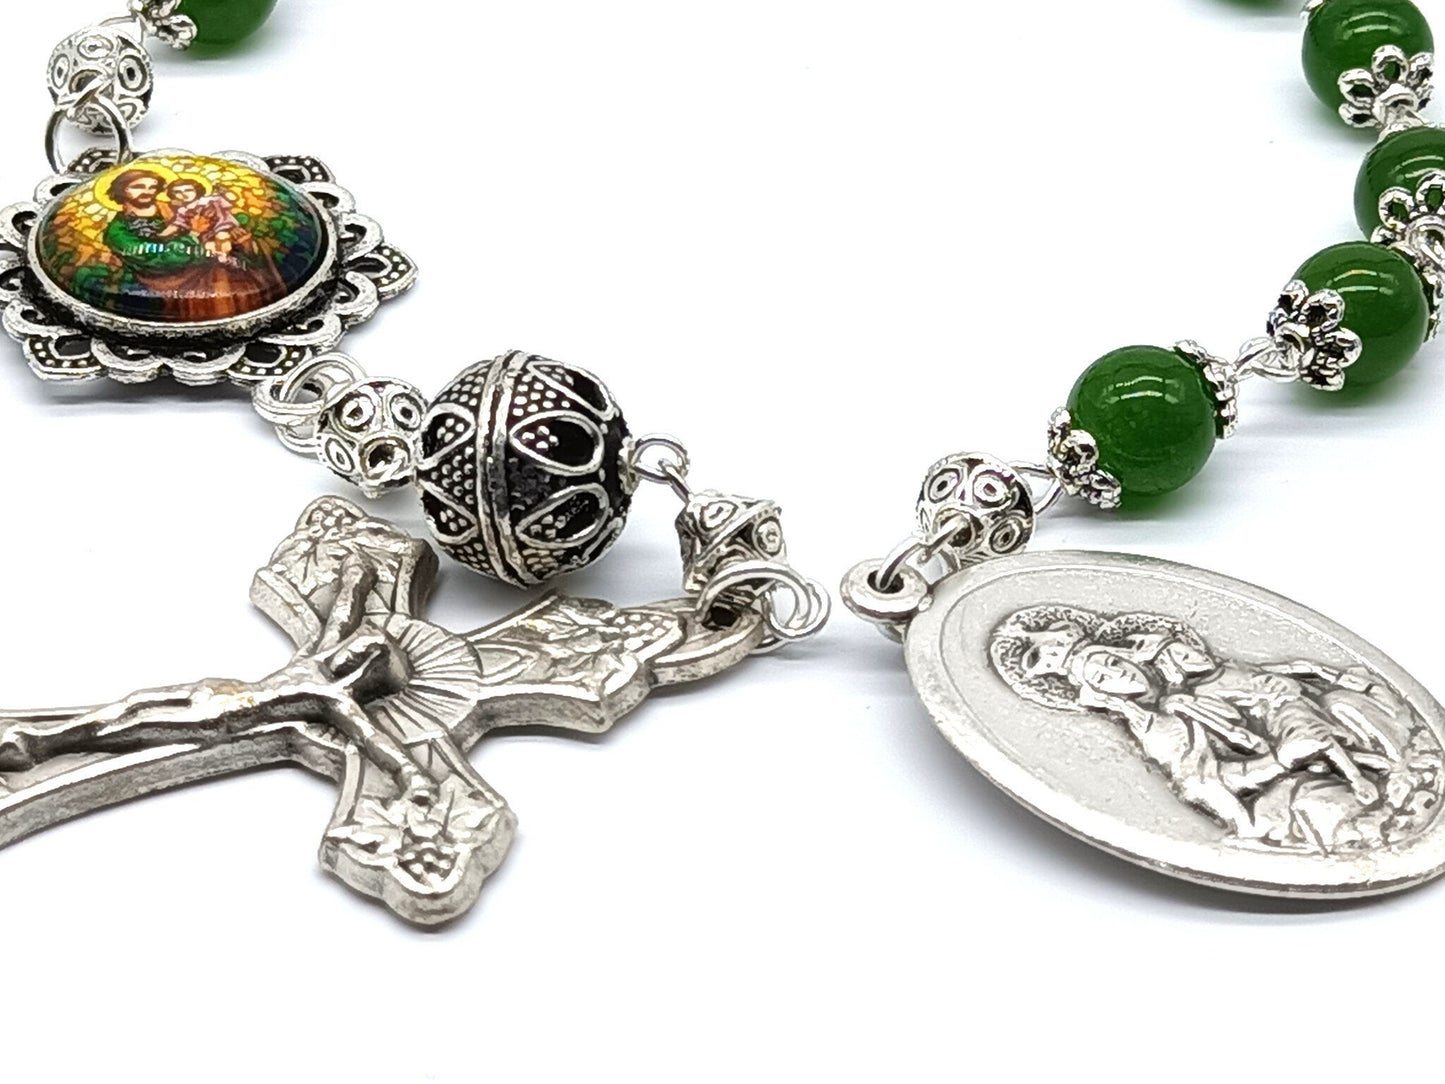 Saint Joseph unique rosary beads single decade with green gemstone beads, silver crucifix, St. Joseph picture medal and Our Lady of Mount Carmel medal.